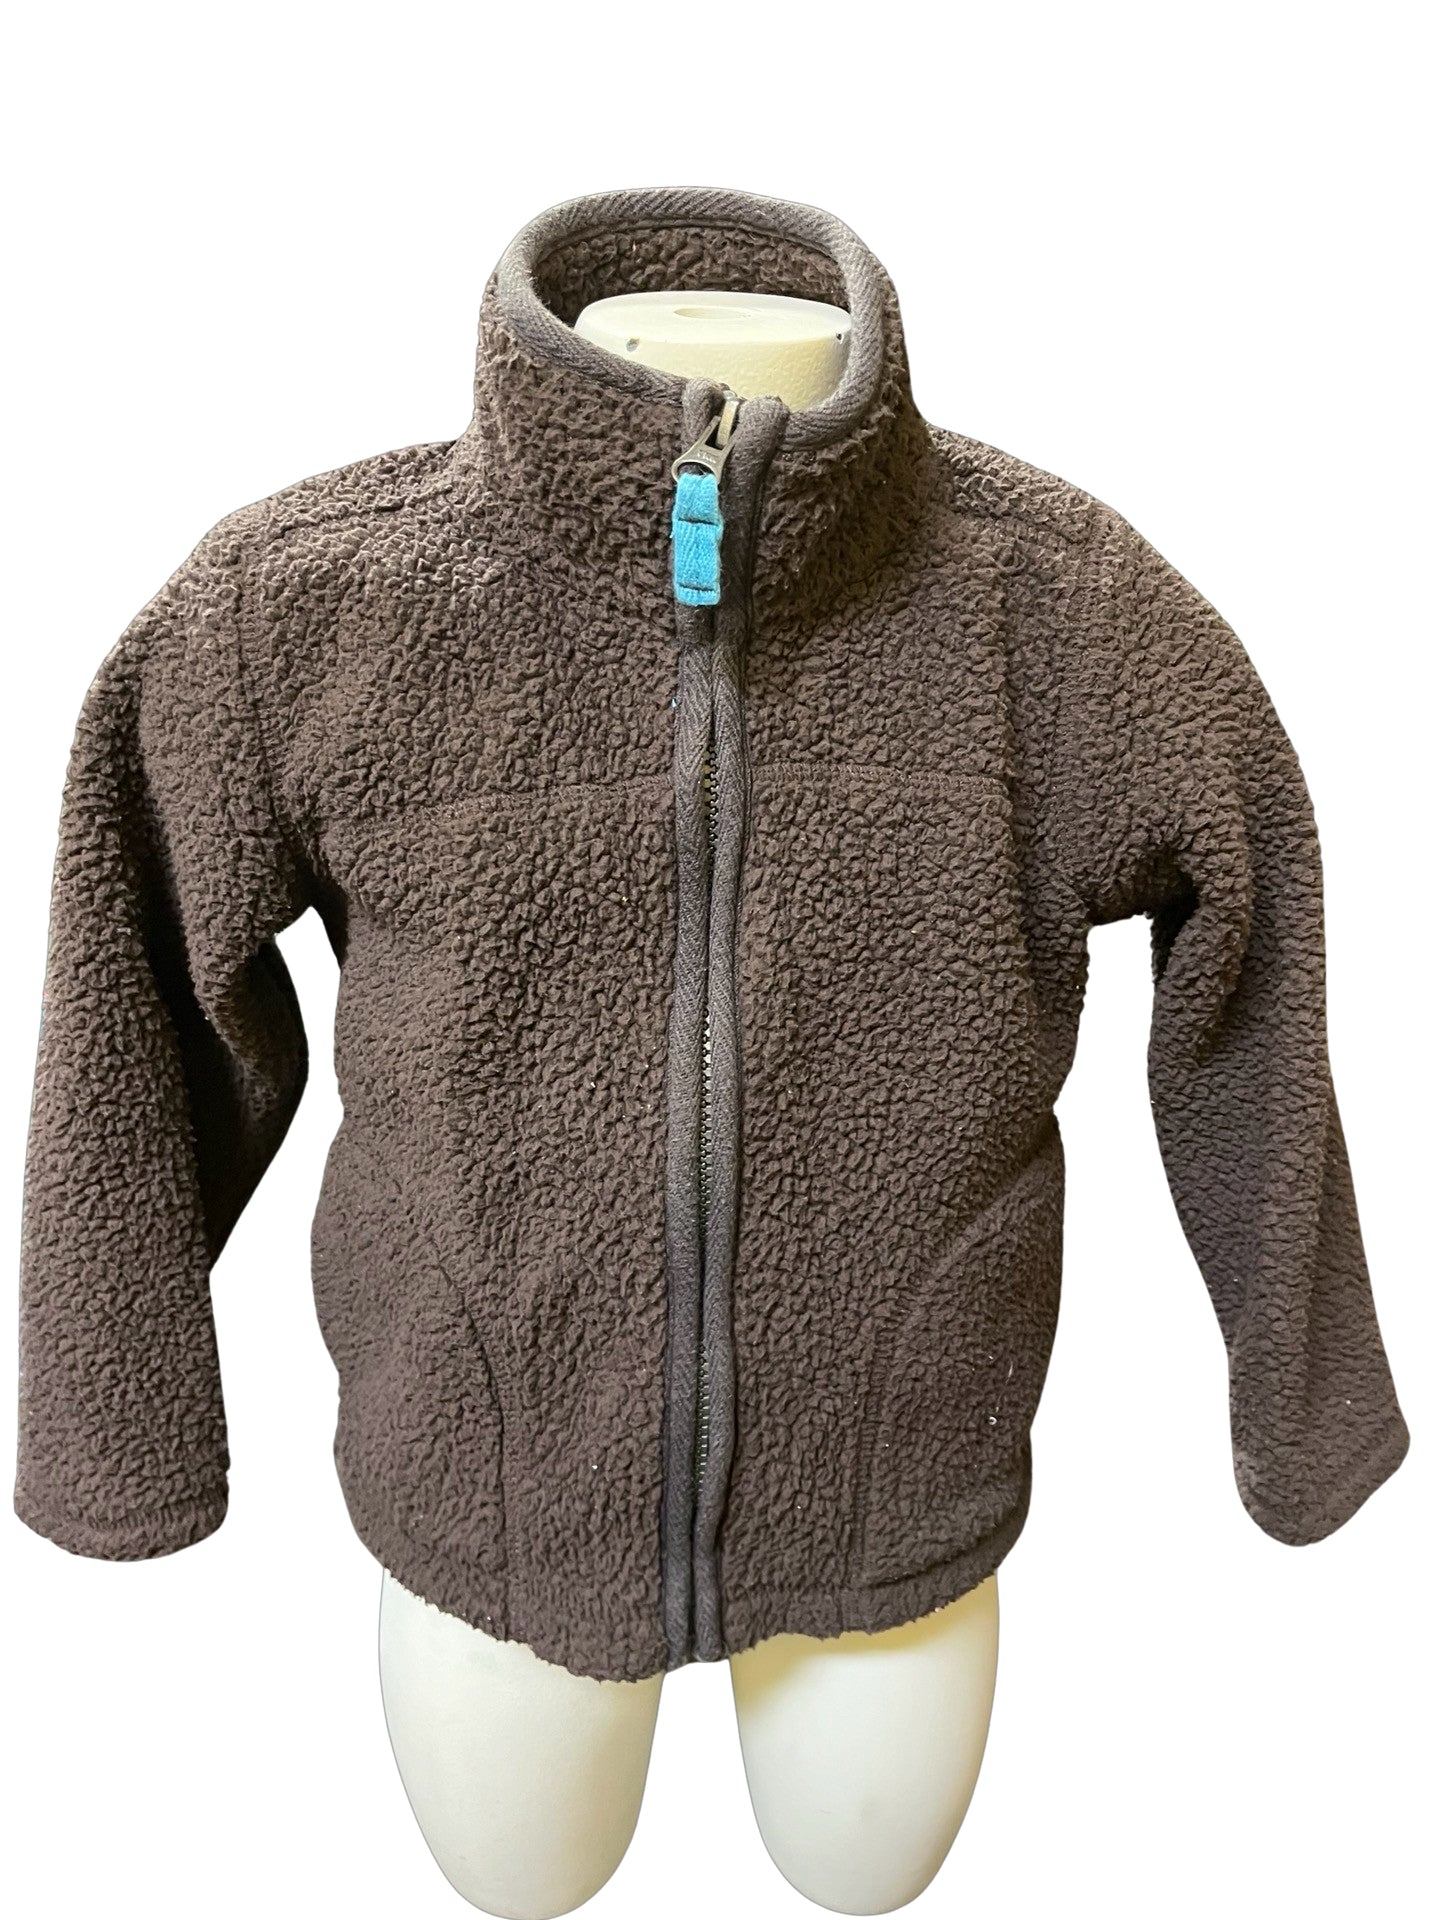 Carters Size 3t brown Jacket - boys